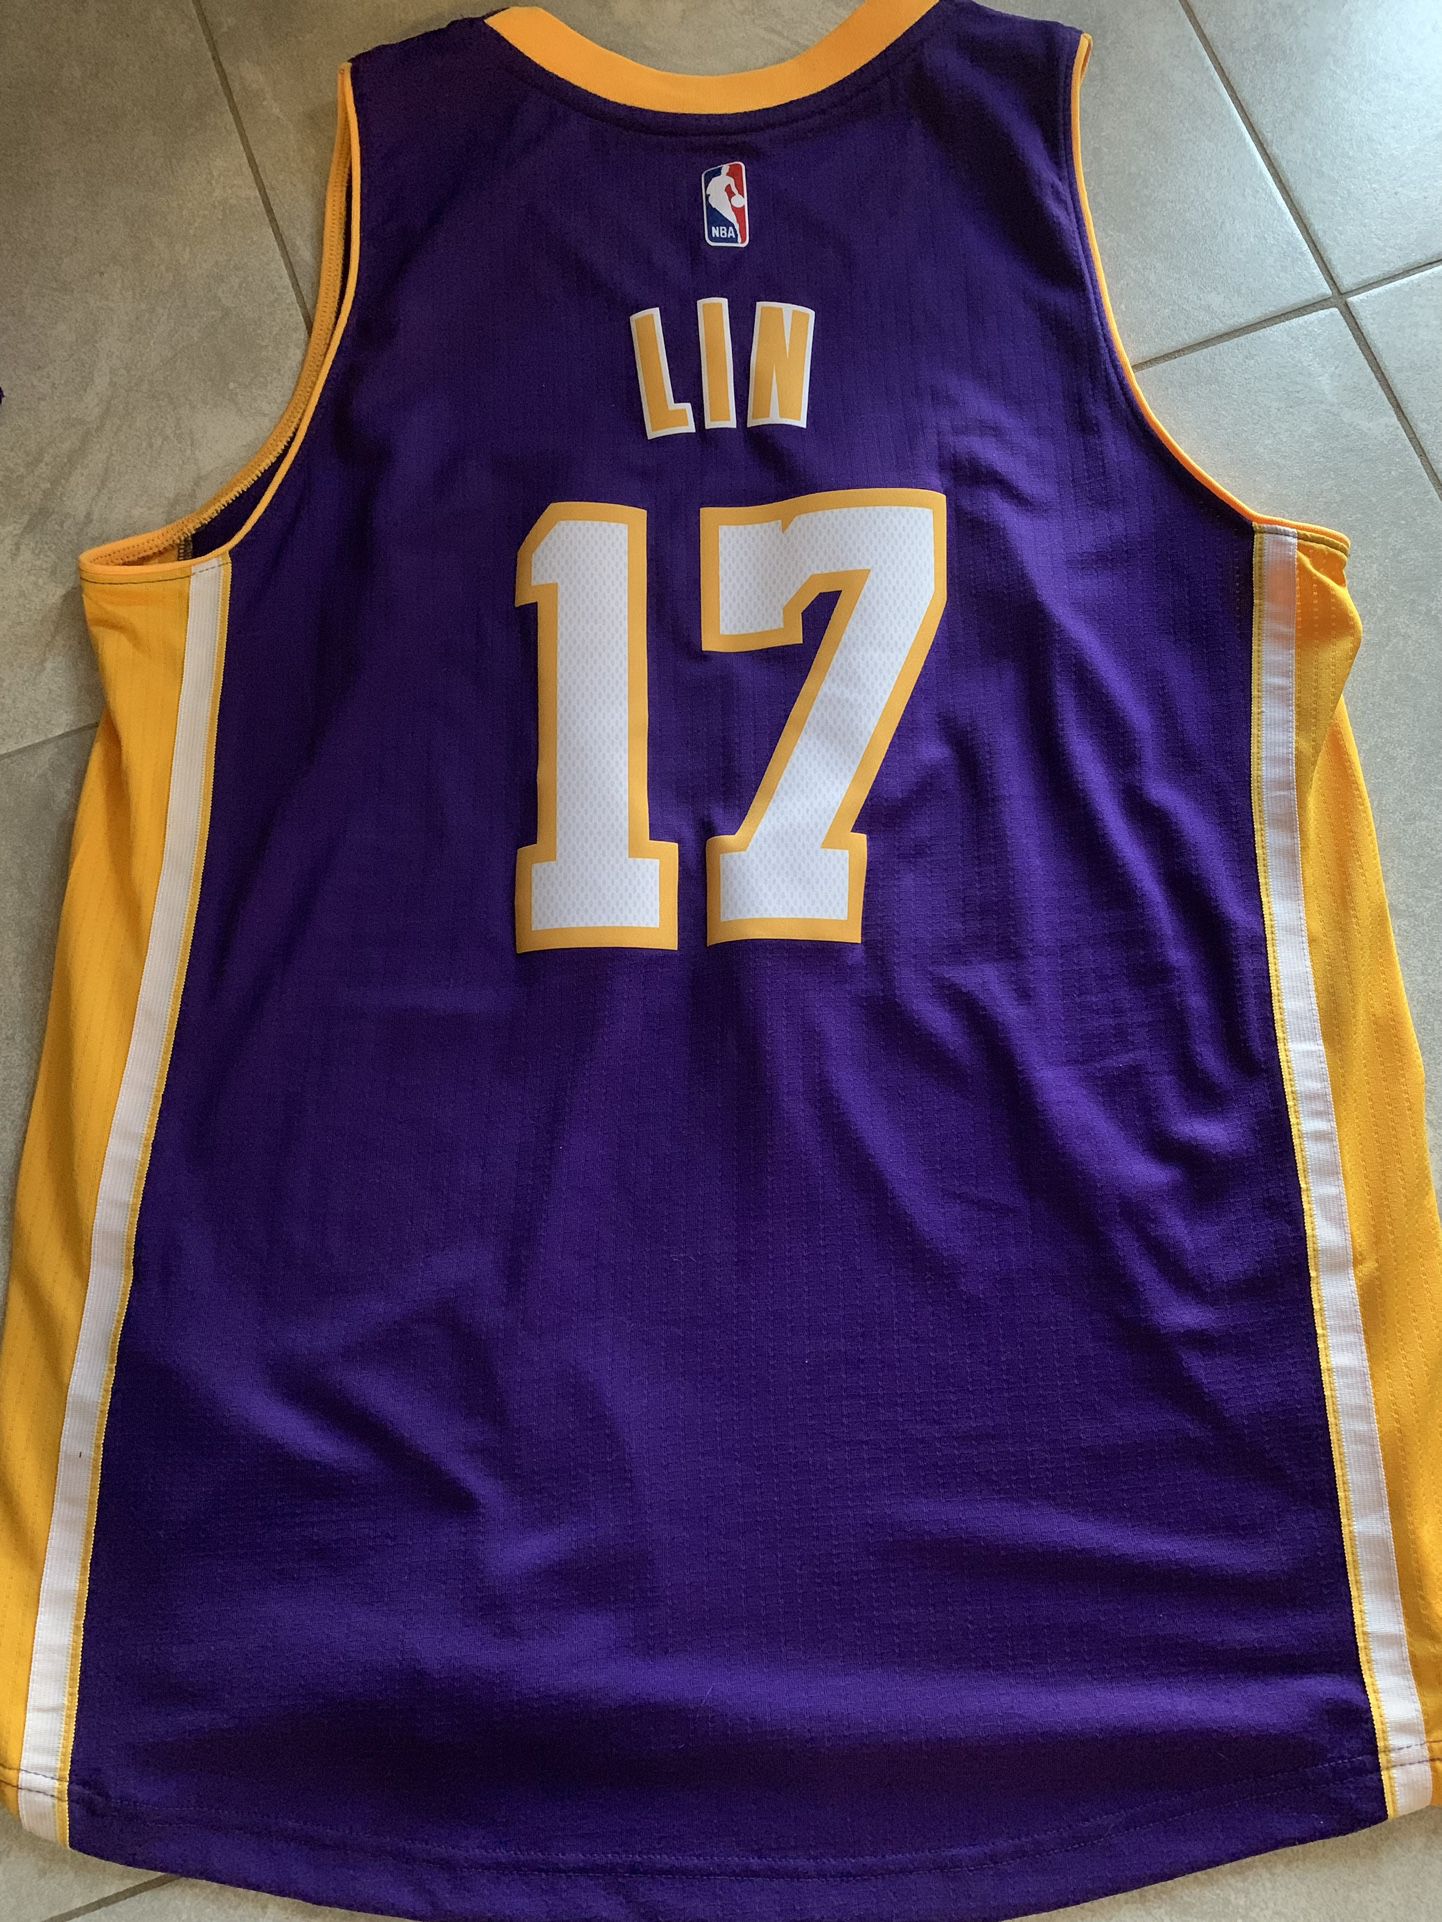 Black Lakers Jersey New With Tags for Sale in Long Beach, CA